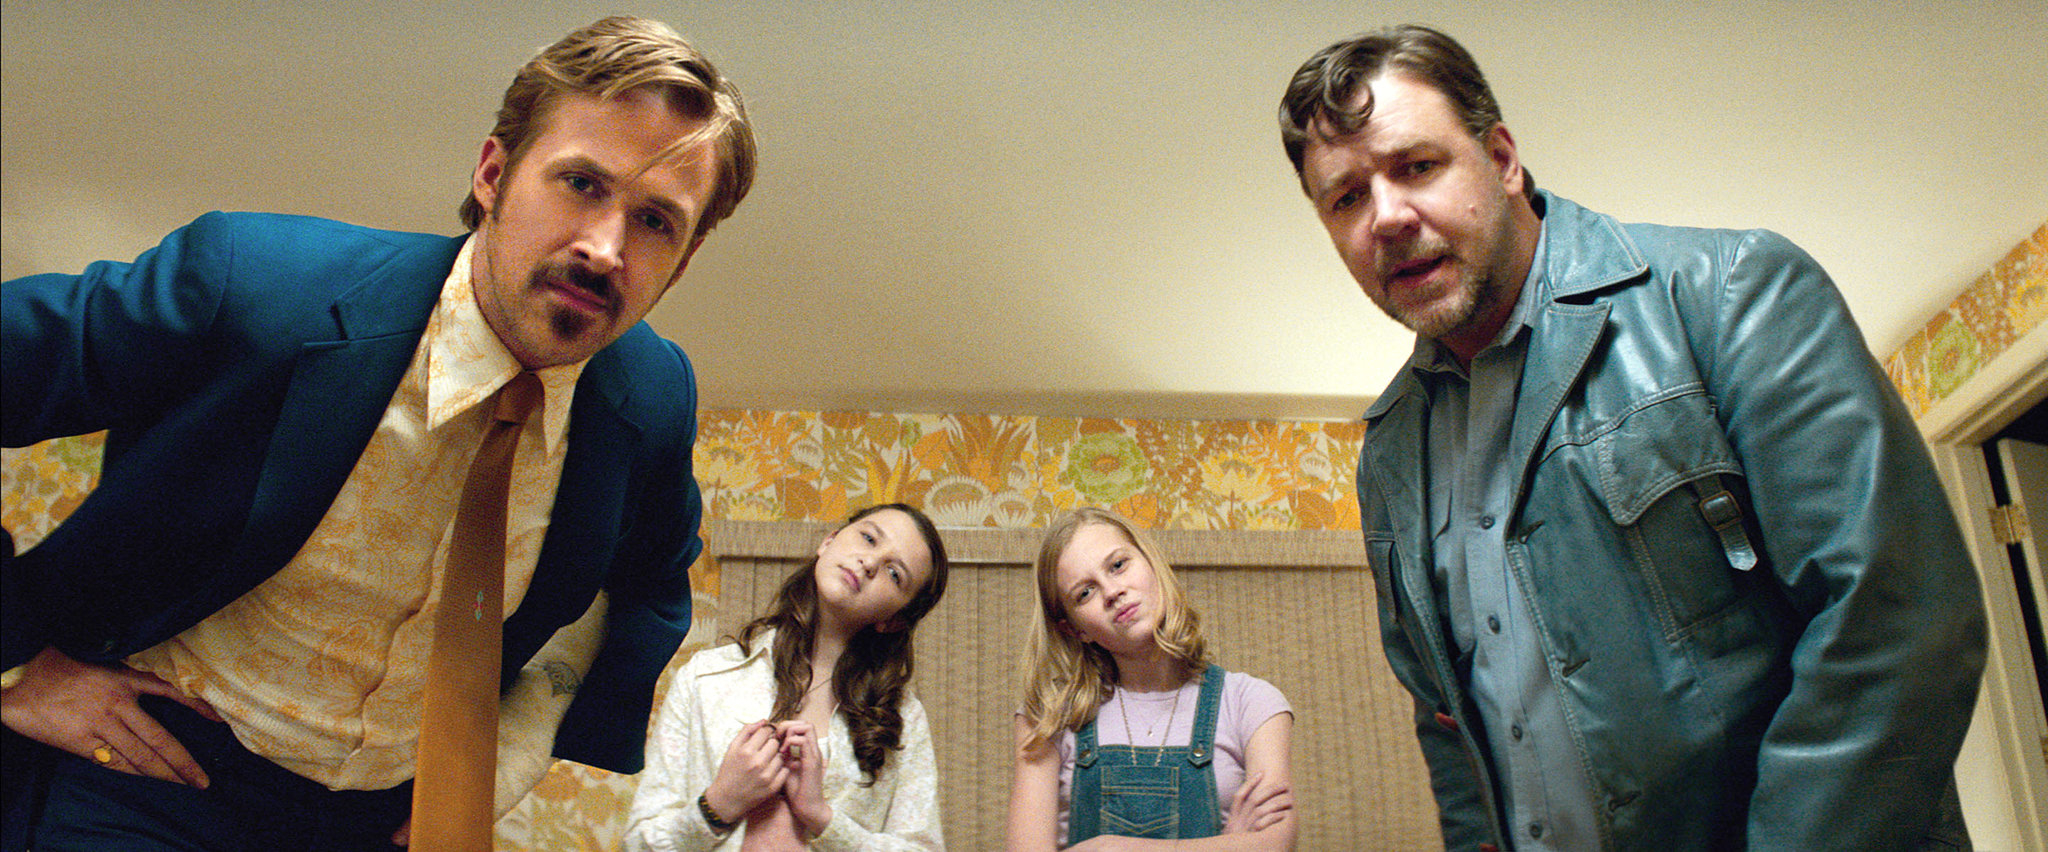 Four people posing dramatically in a vintage-style room from the movie &quot;The Nice Guys.&quot;